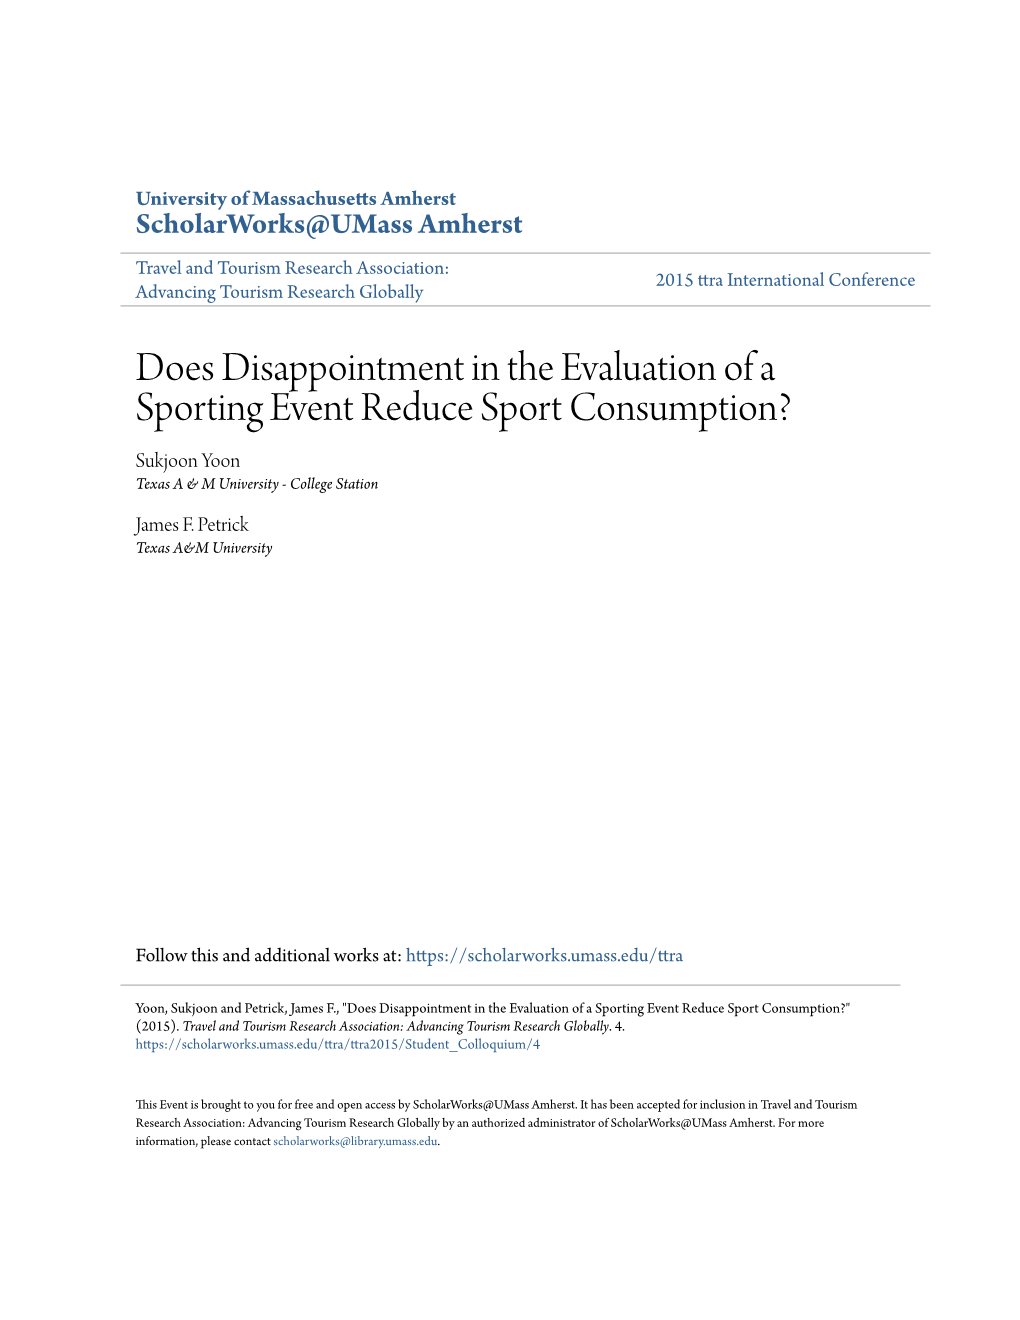 Does Disappointment in the Evaluation of a Sporting Event Reduce Sport Consumption? Sukjoon Yoon Texas a & M University - College Station